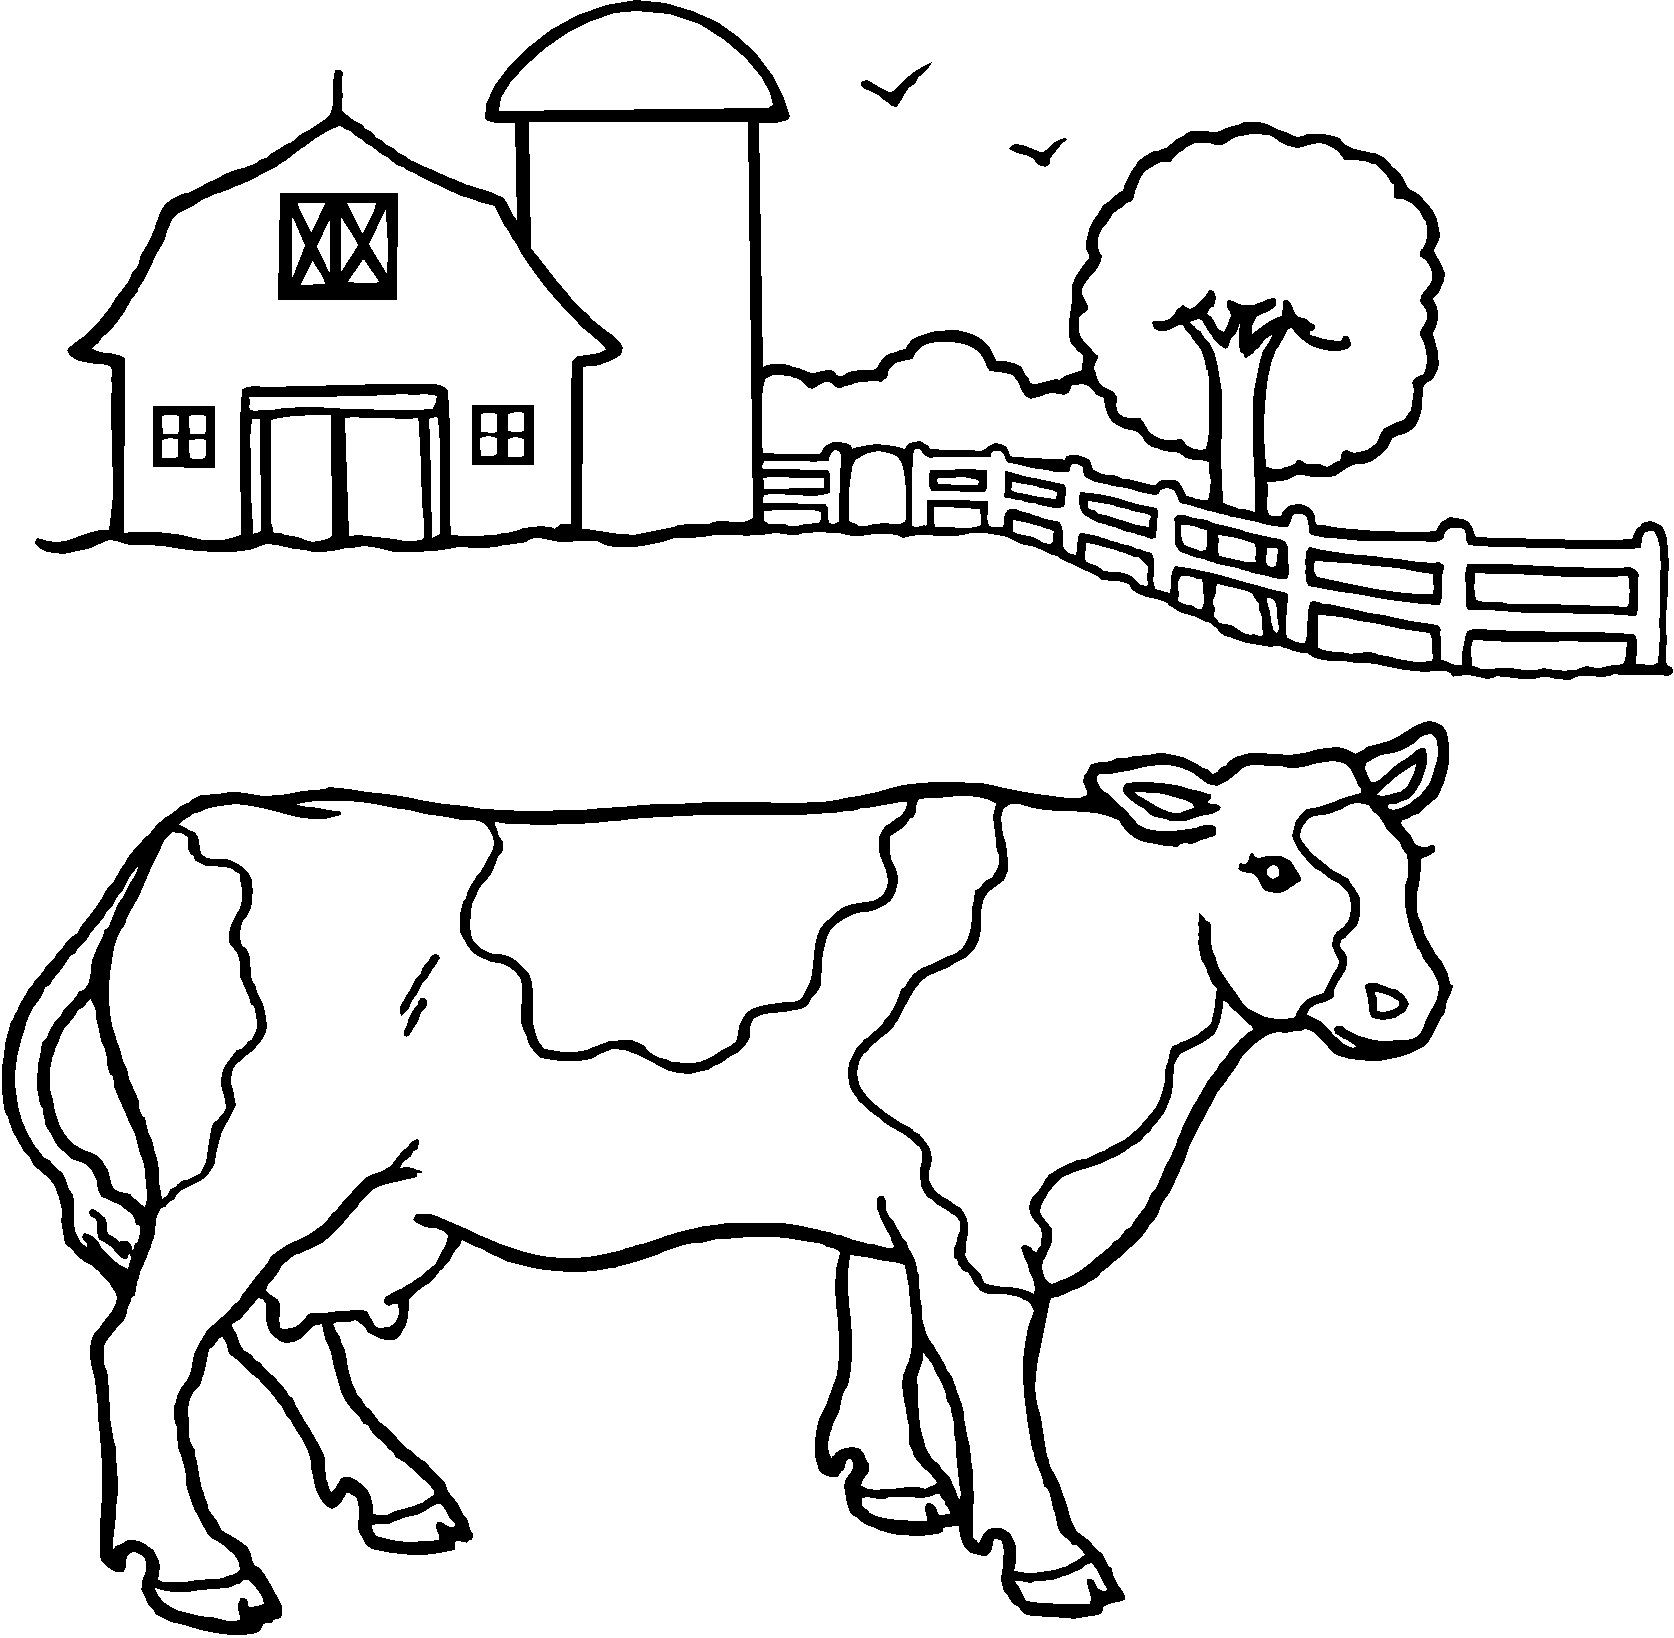 cow coloring page | Coloring Pages for Kids